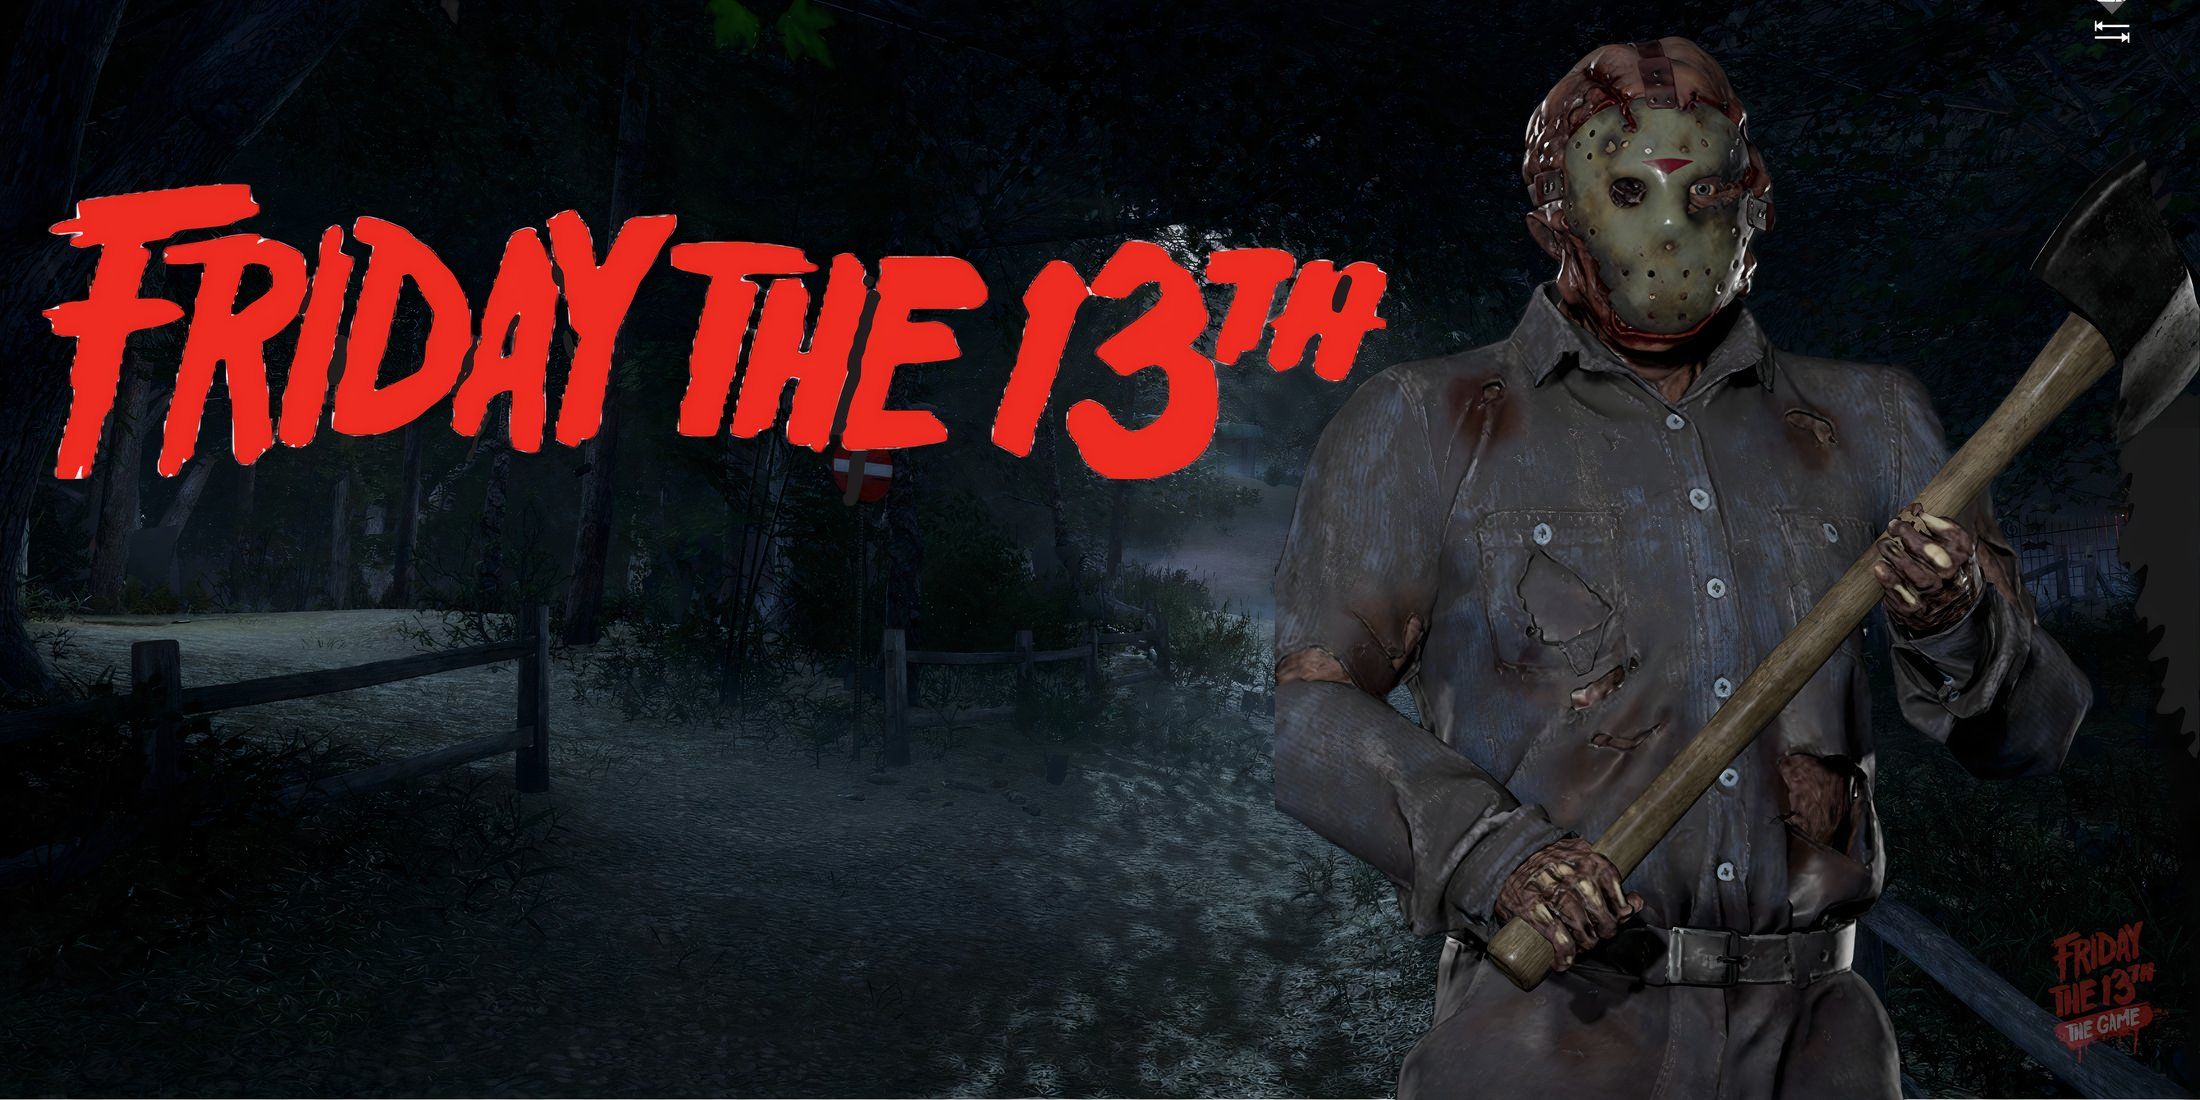 Friday the 13th's Rumored Linear Game Would Be a No-Brainer